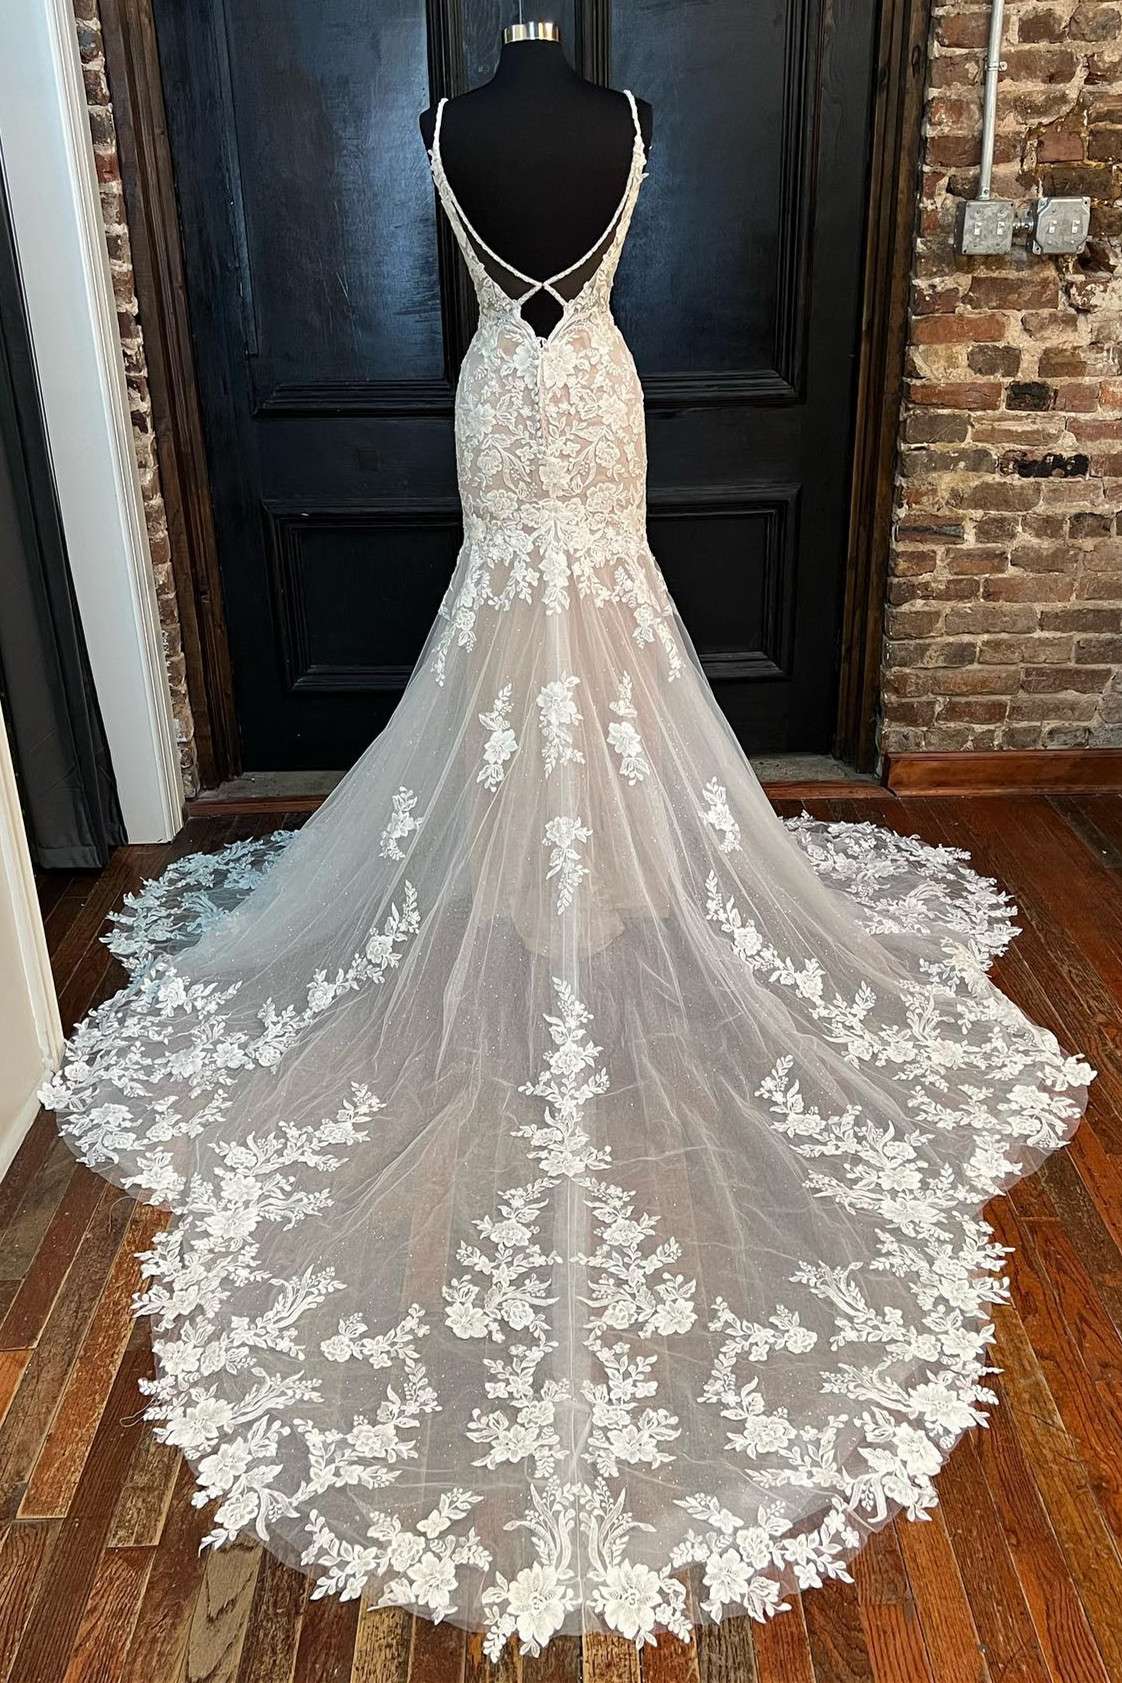 Off-White Appliques Backless Trumpet Long Wedding Dress